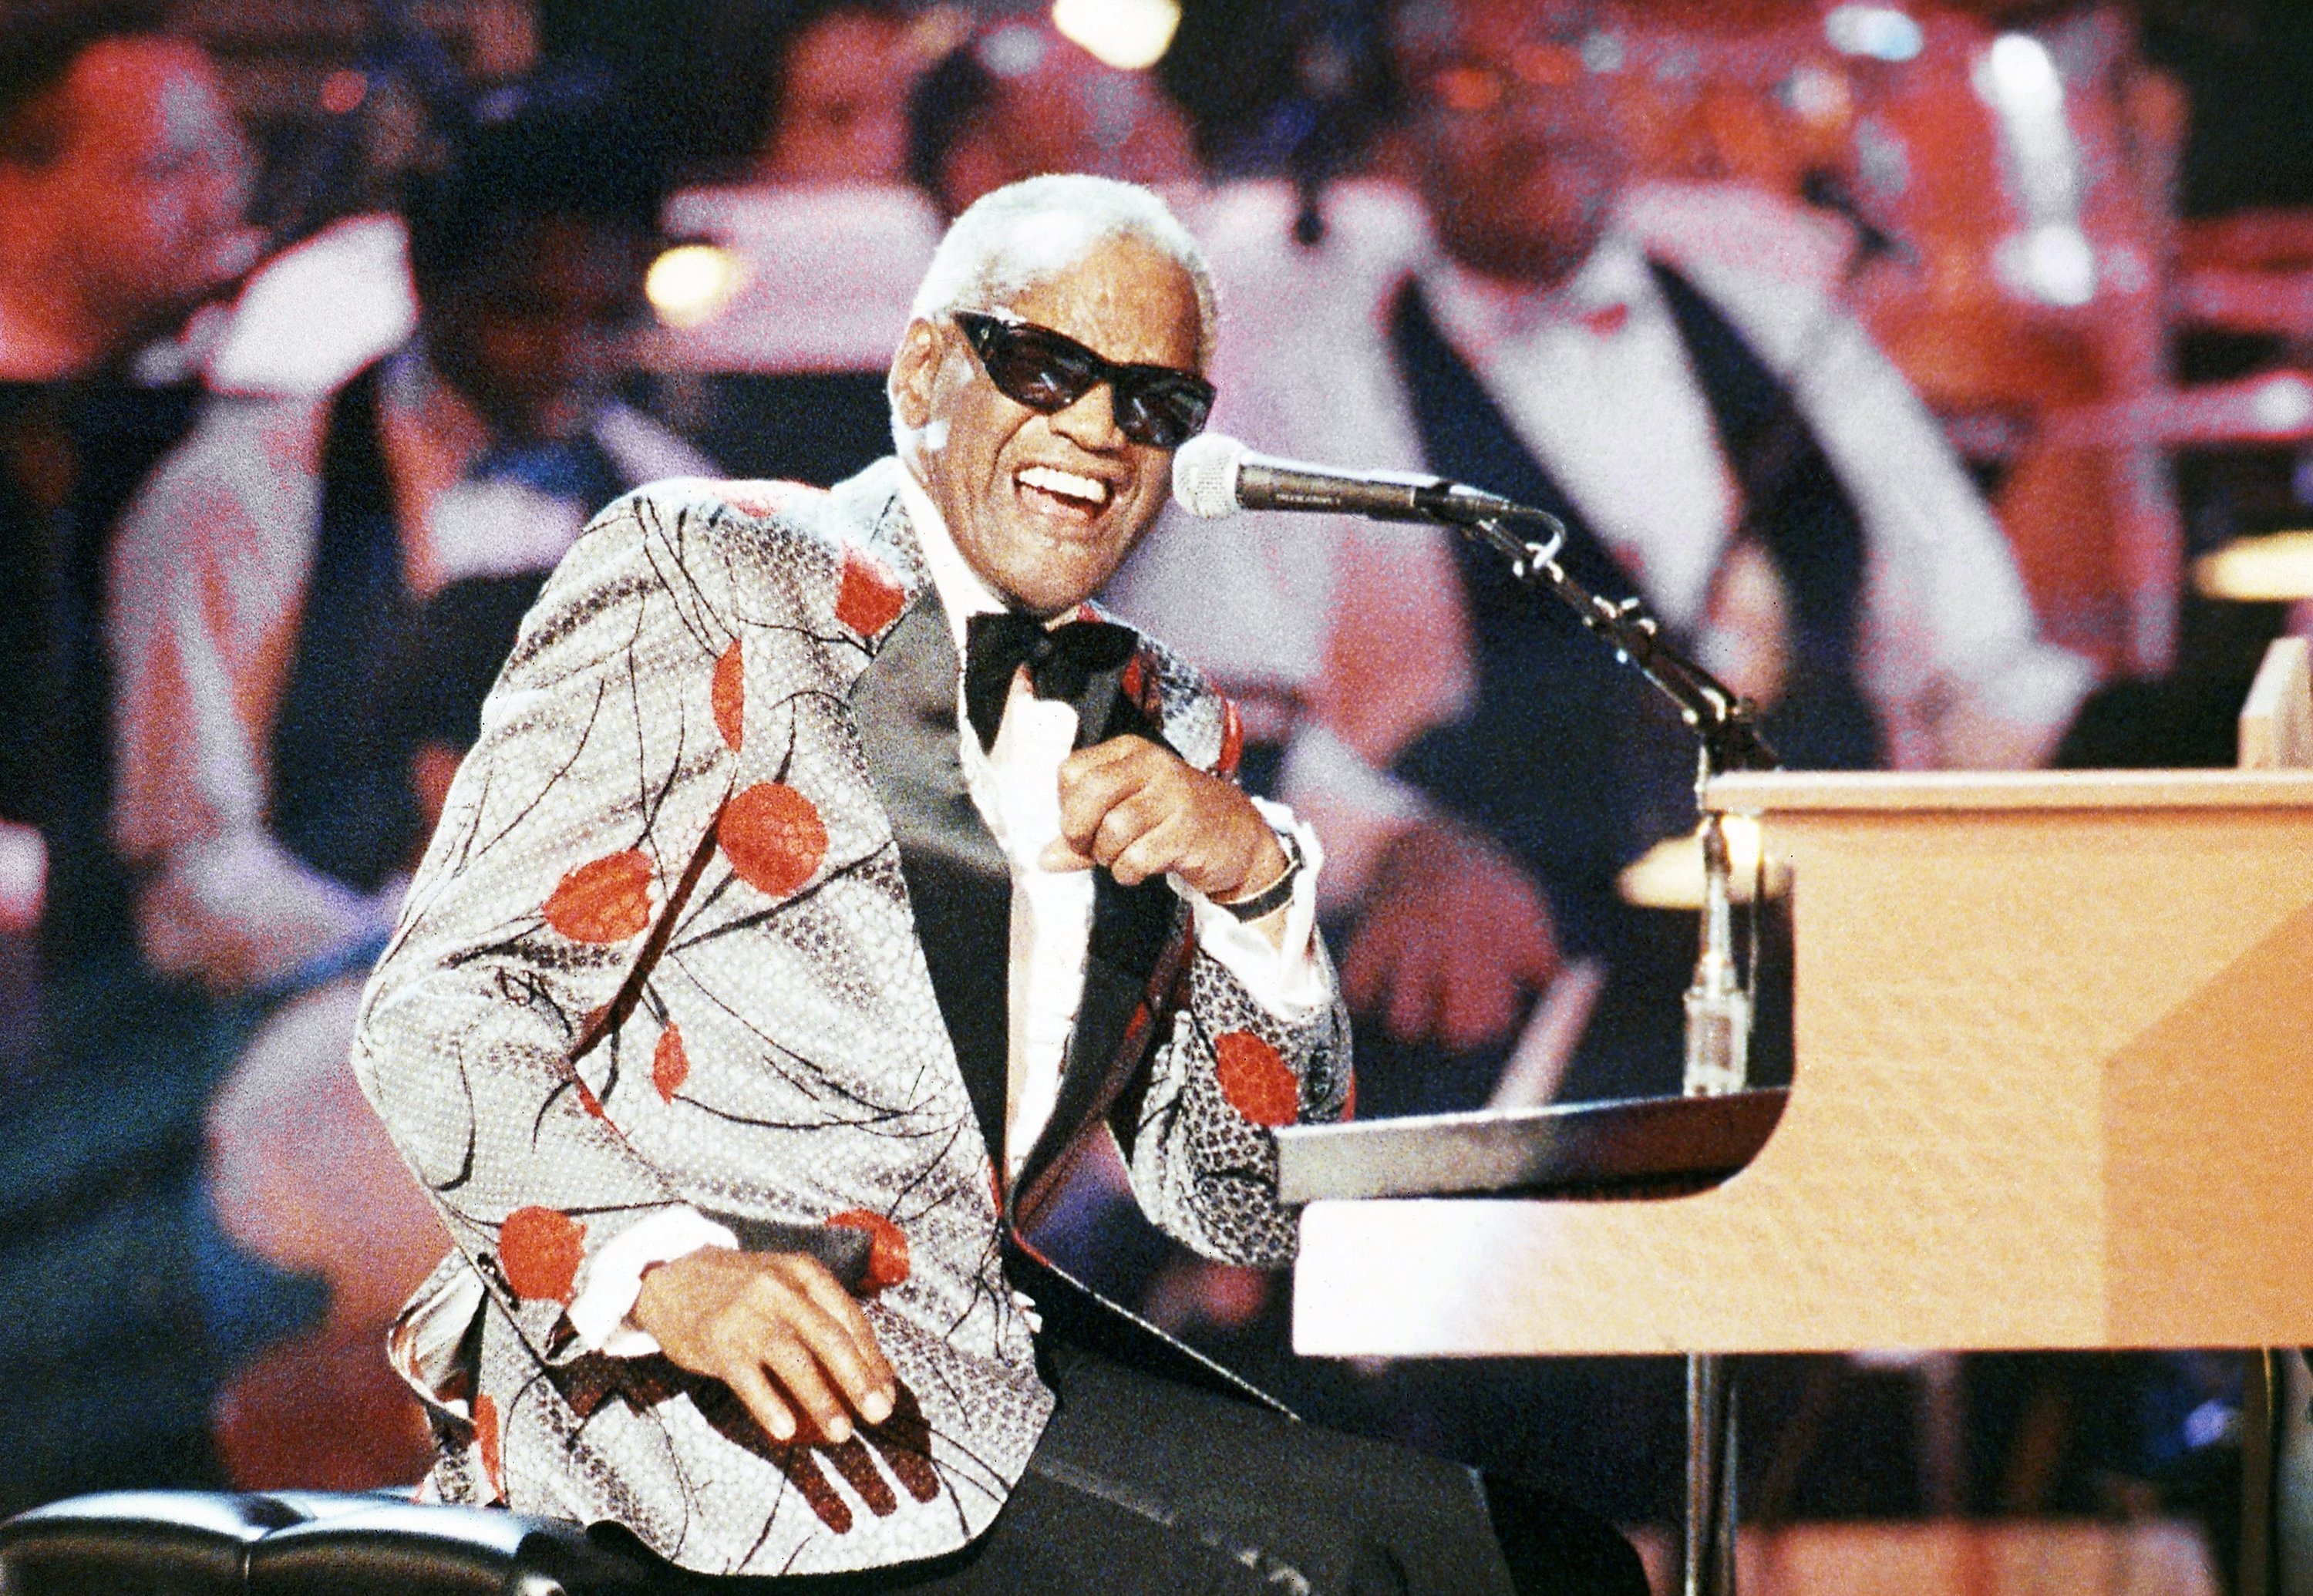 Ray Charles The Genius Blending Different Musical Genres Daily Sabah.